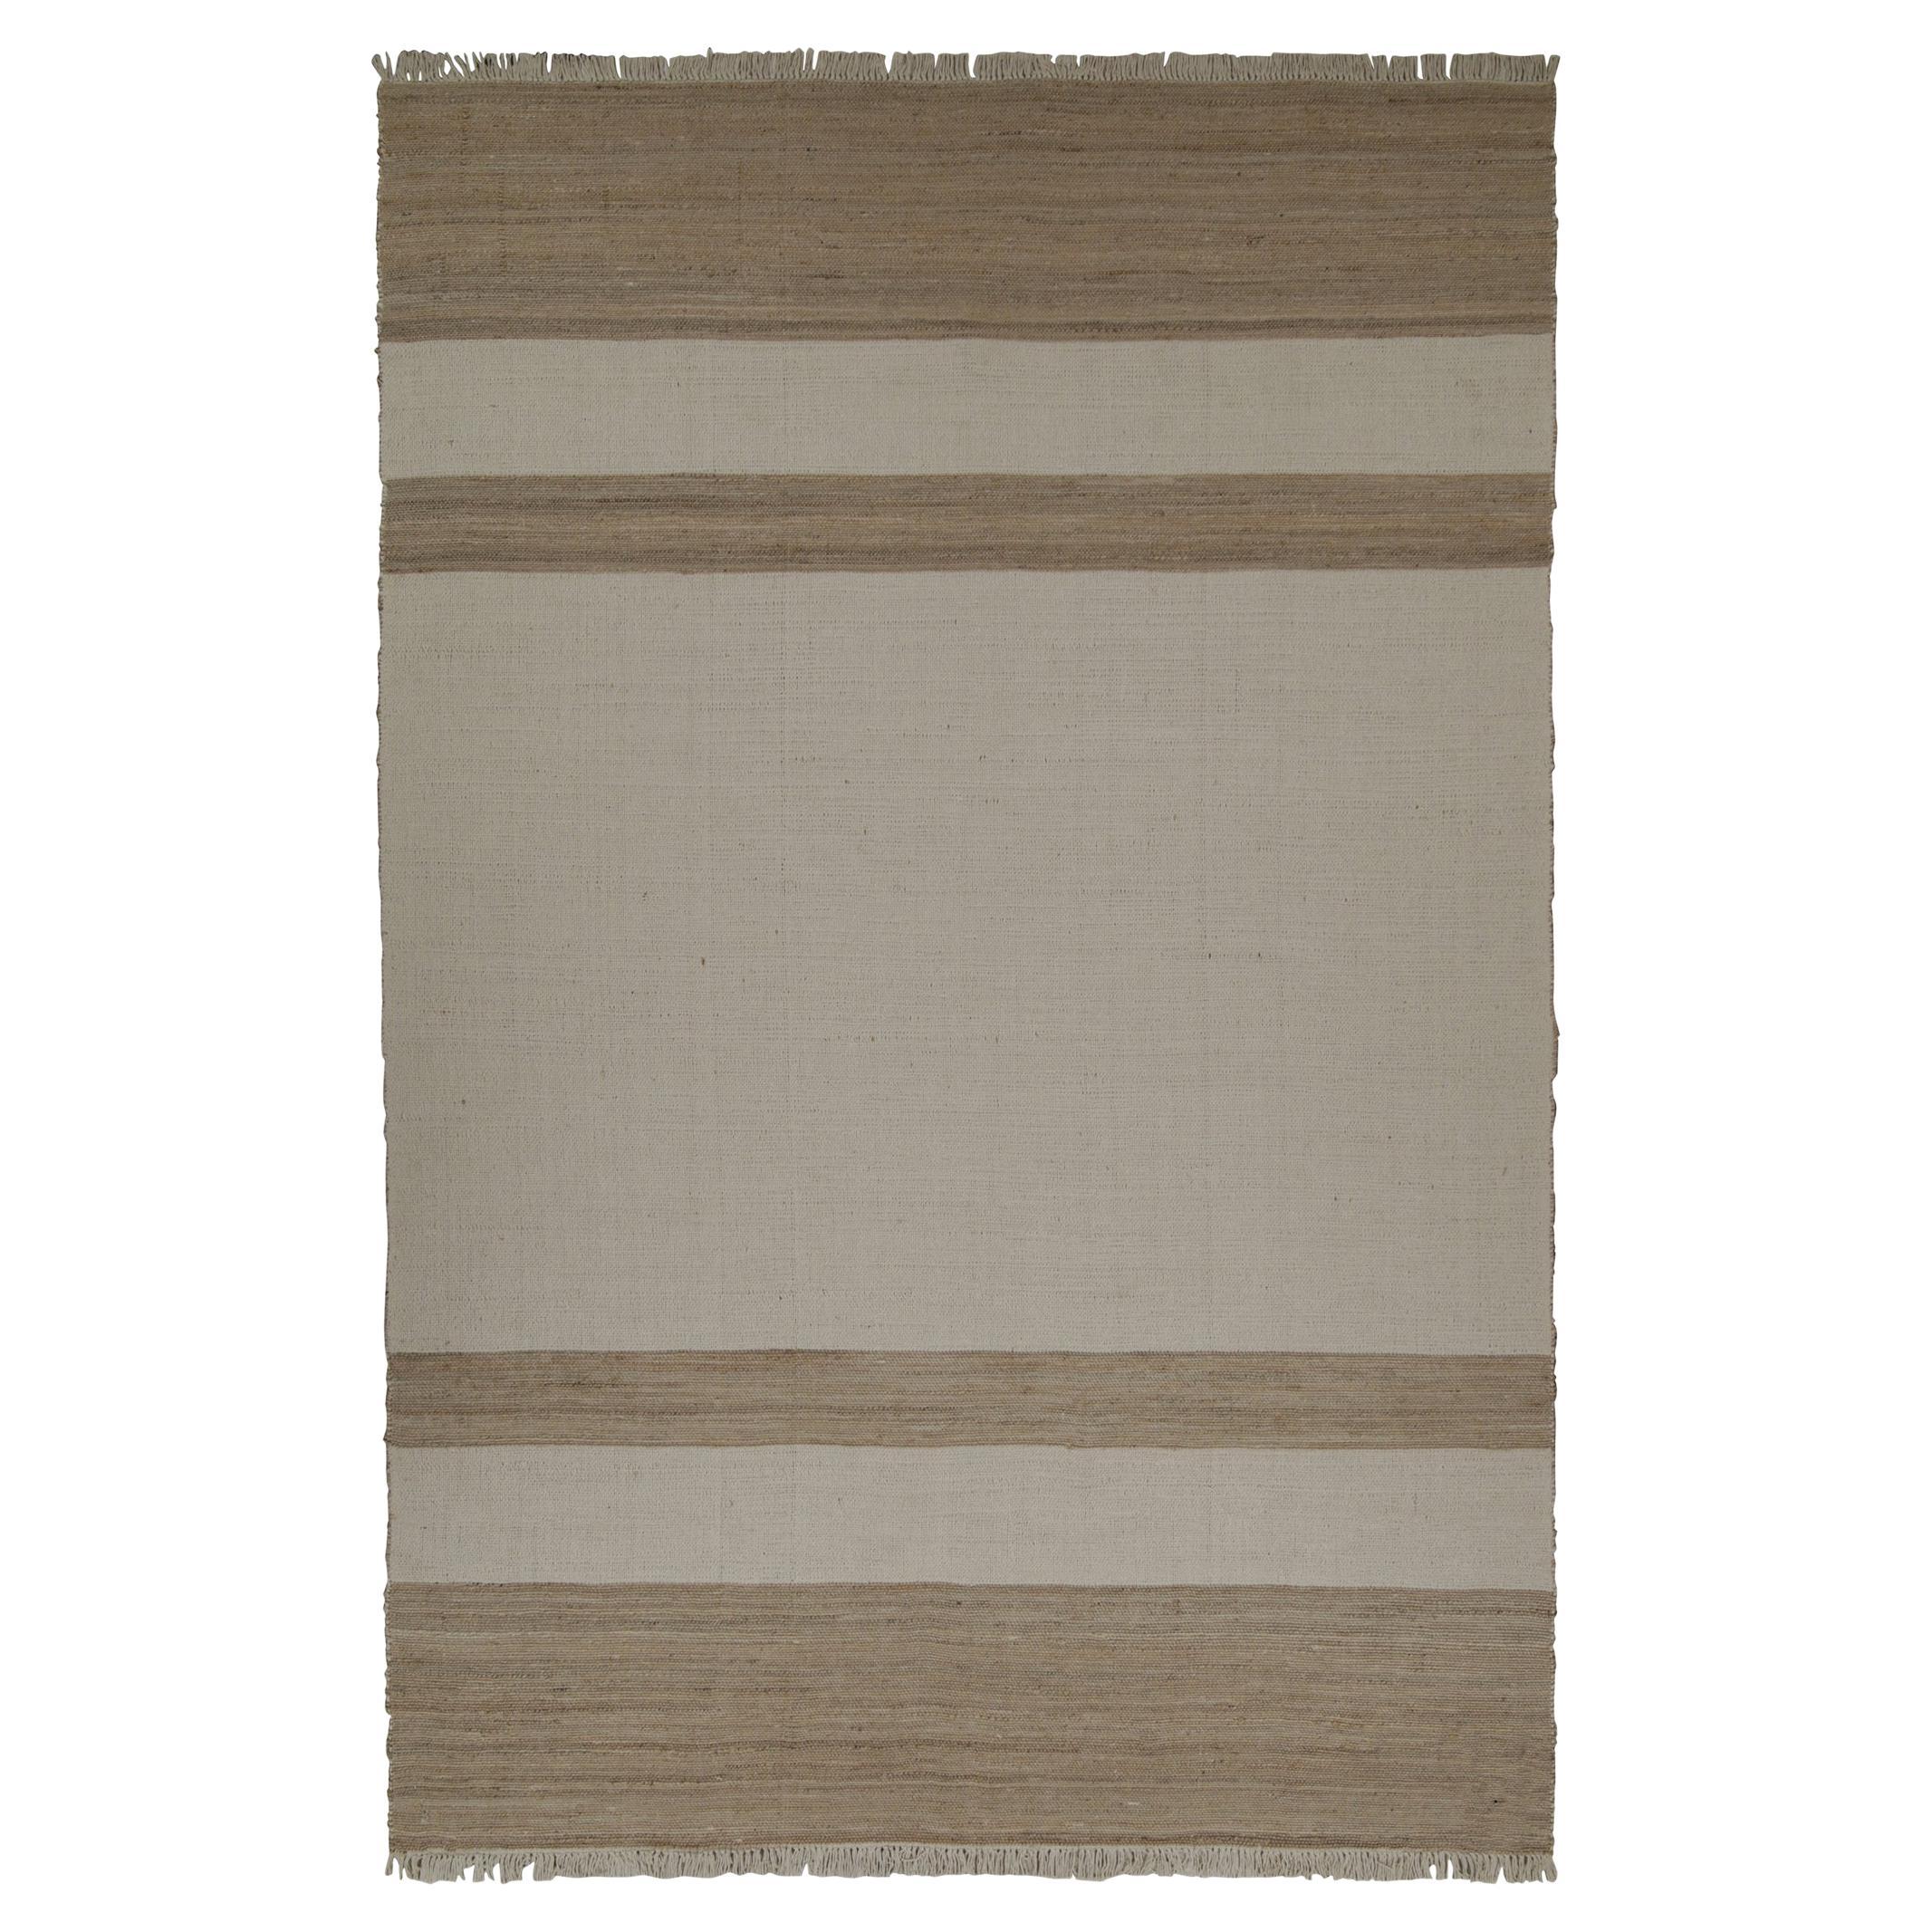 Rug & Kilim’s Contemporary Jute Kilim in White and Beige-Brown Stripes